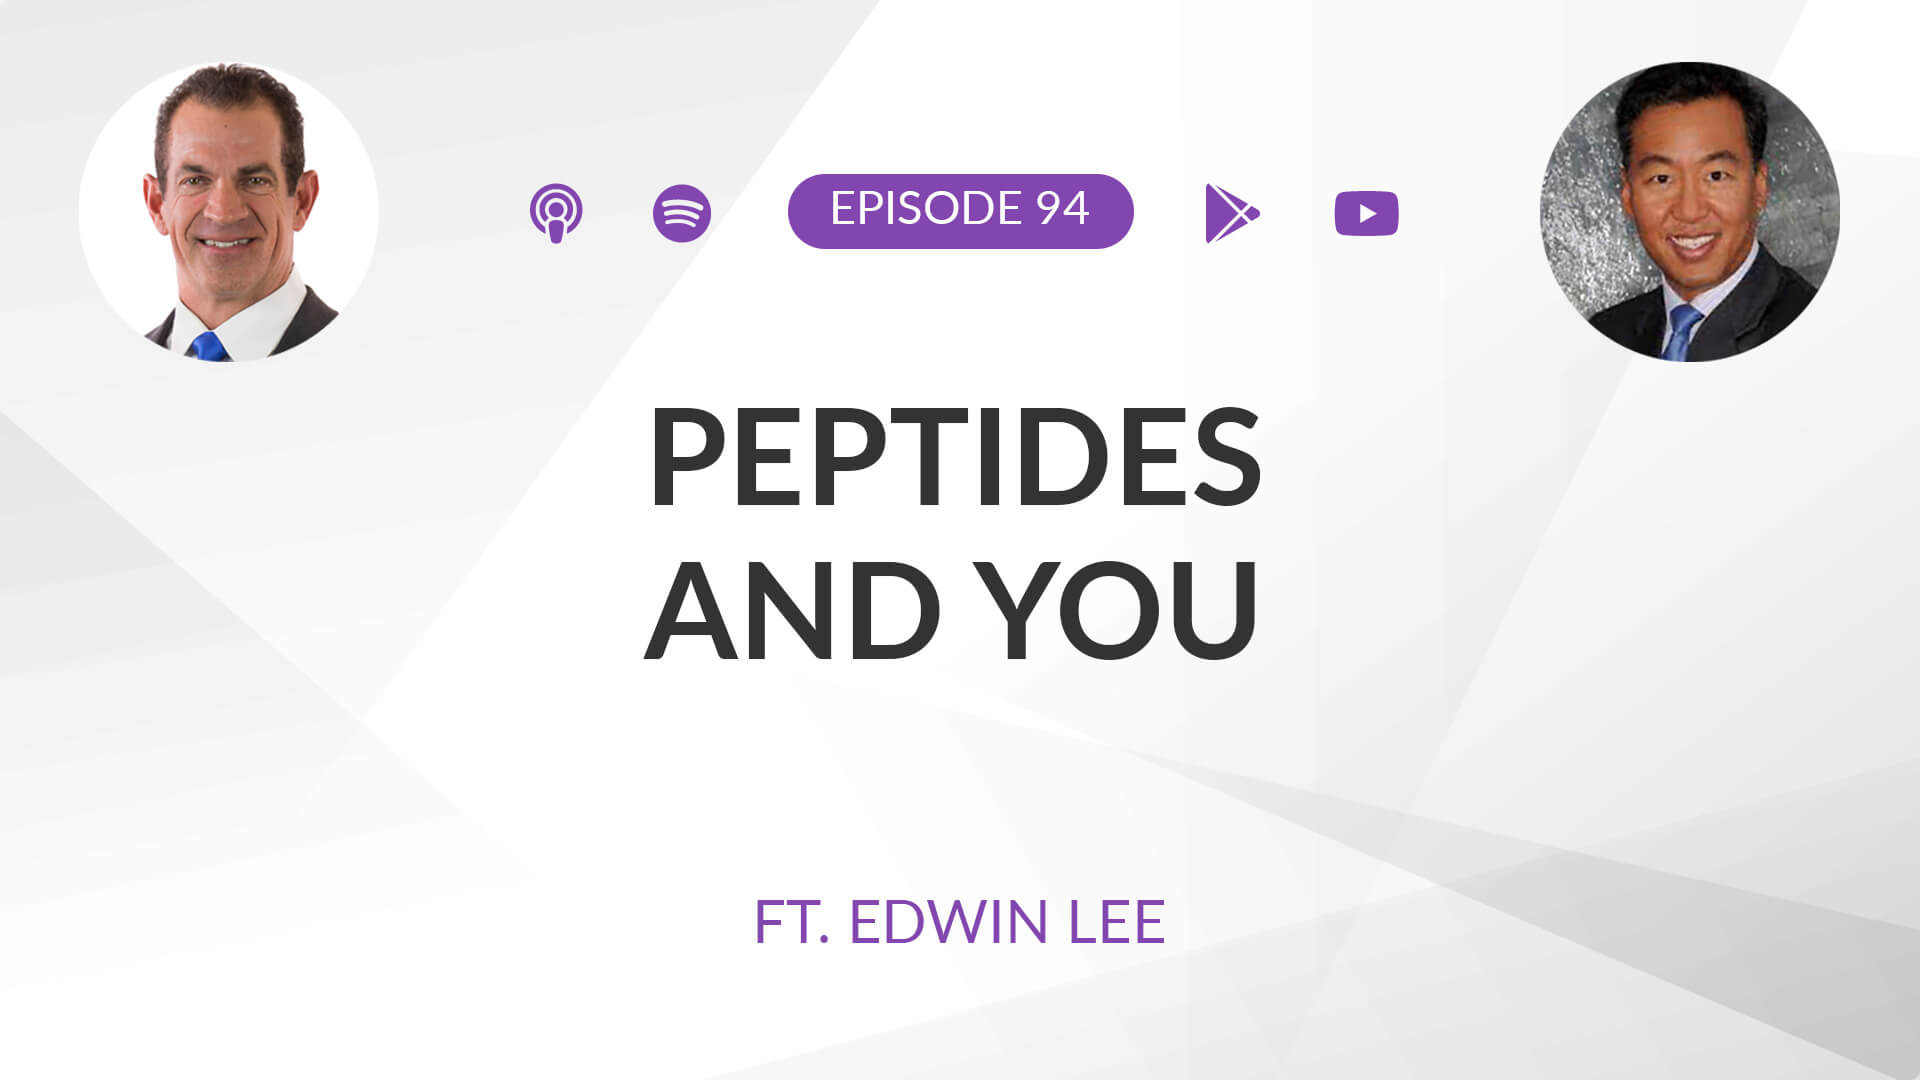 Ep 94: Peptides and You: A Good Choice? ft. Edwin Lee